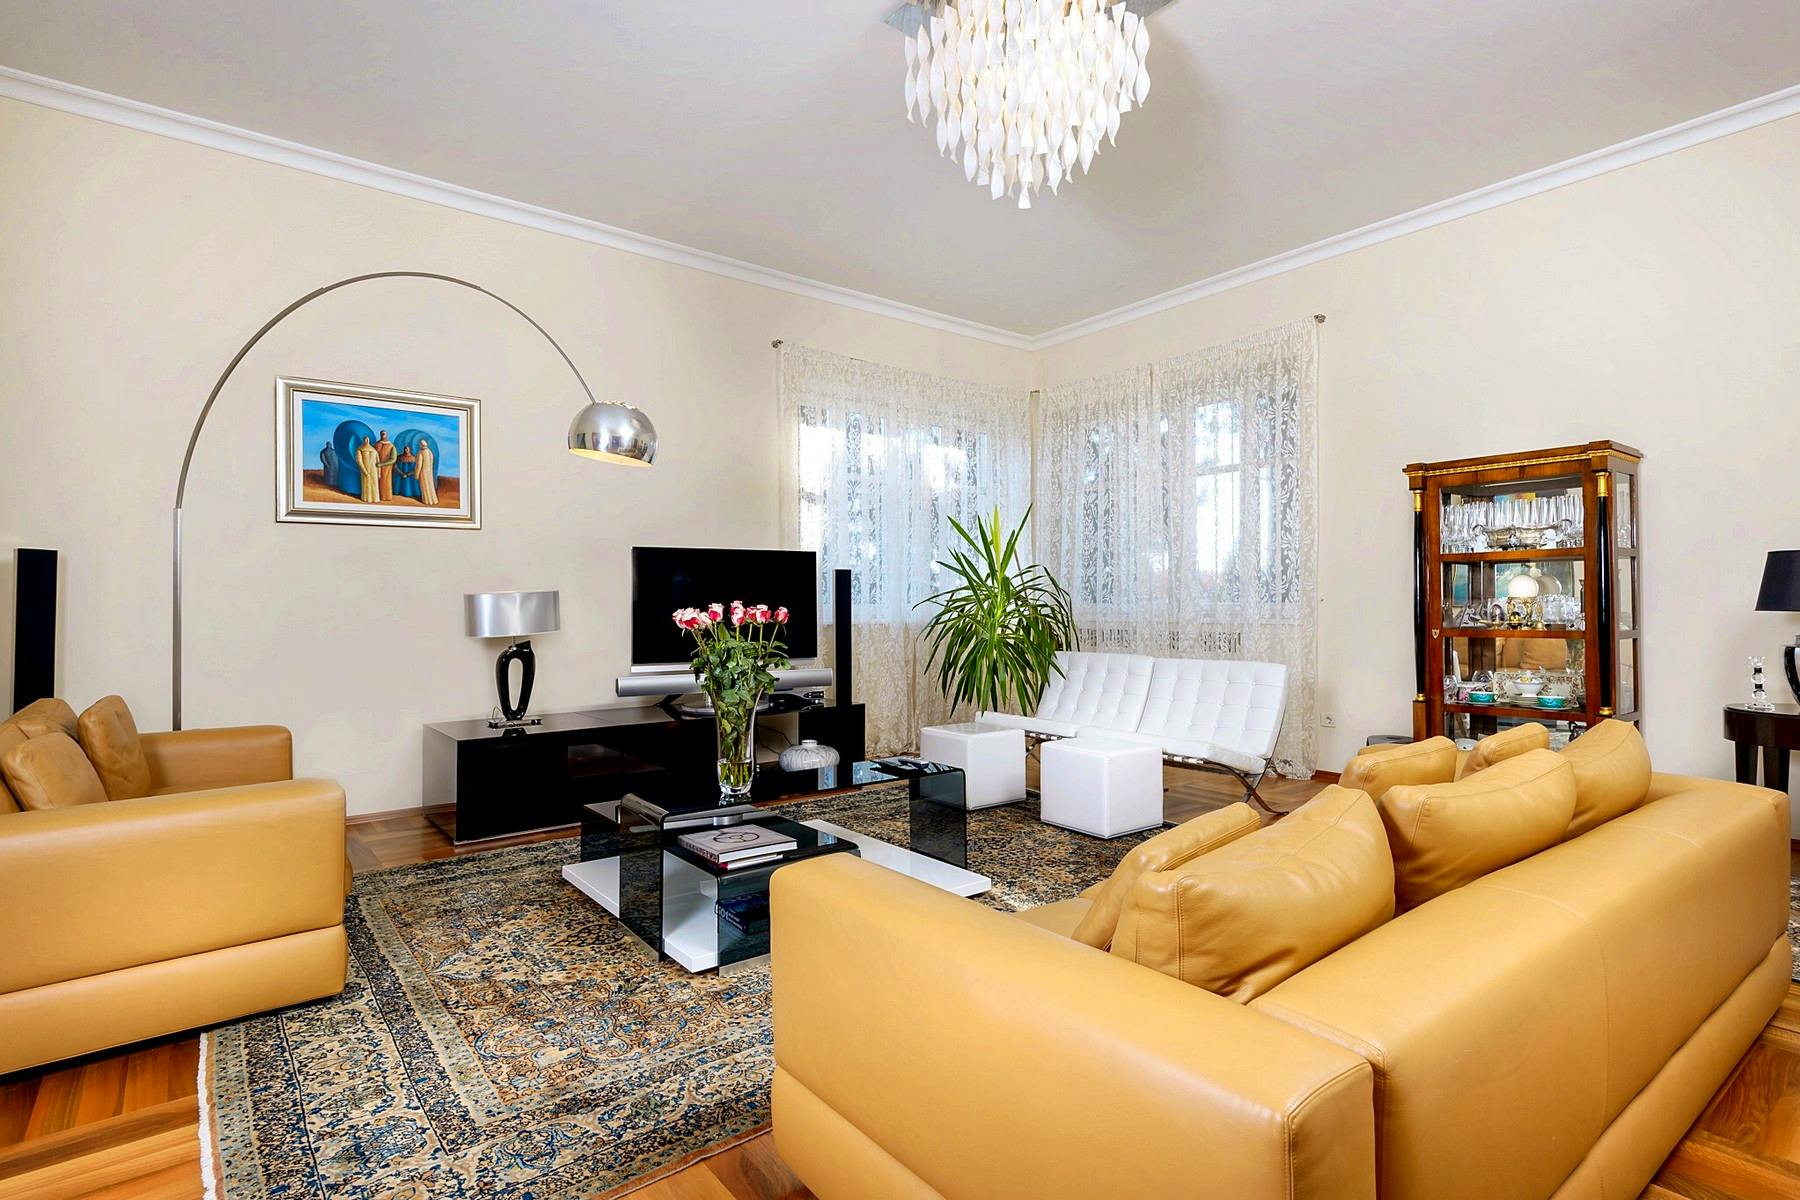 Spacious living room area with modern amenities